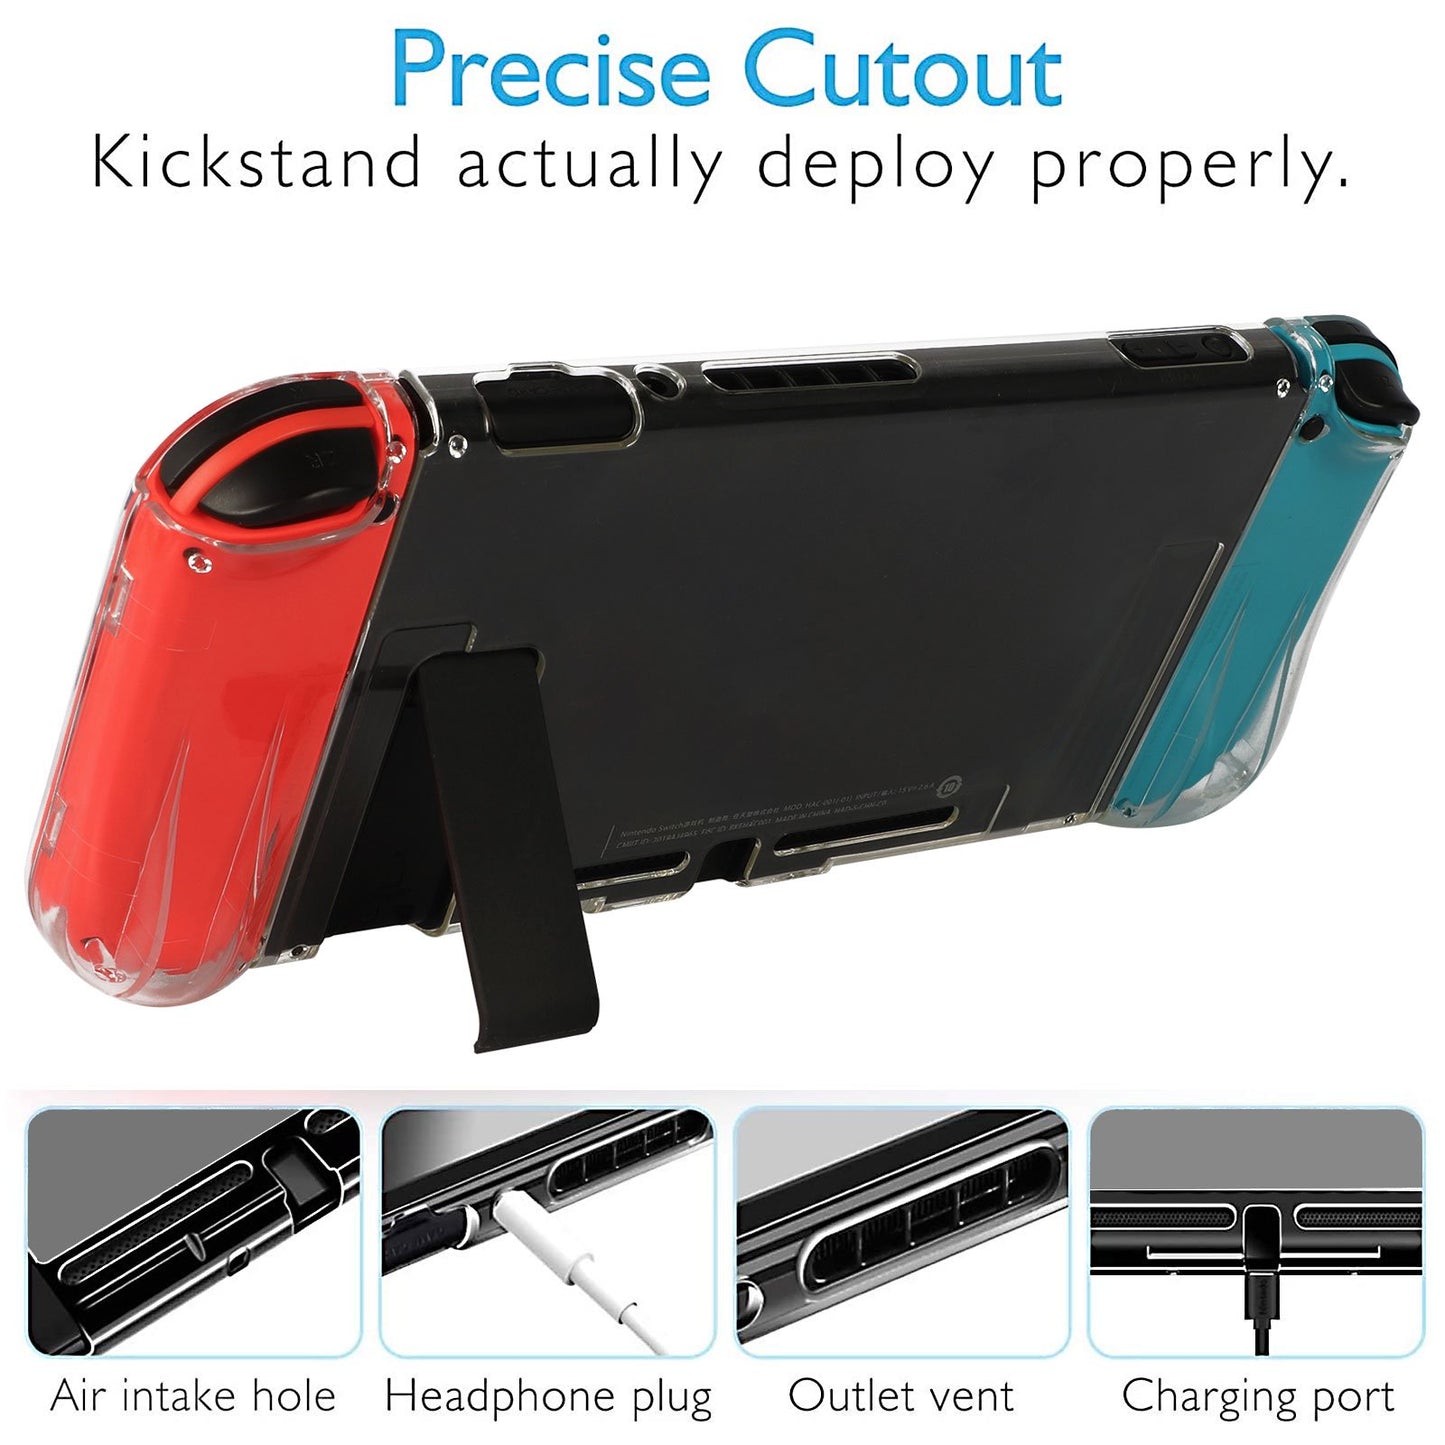 16 in 1 Carrying Case For Nintendo Switch